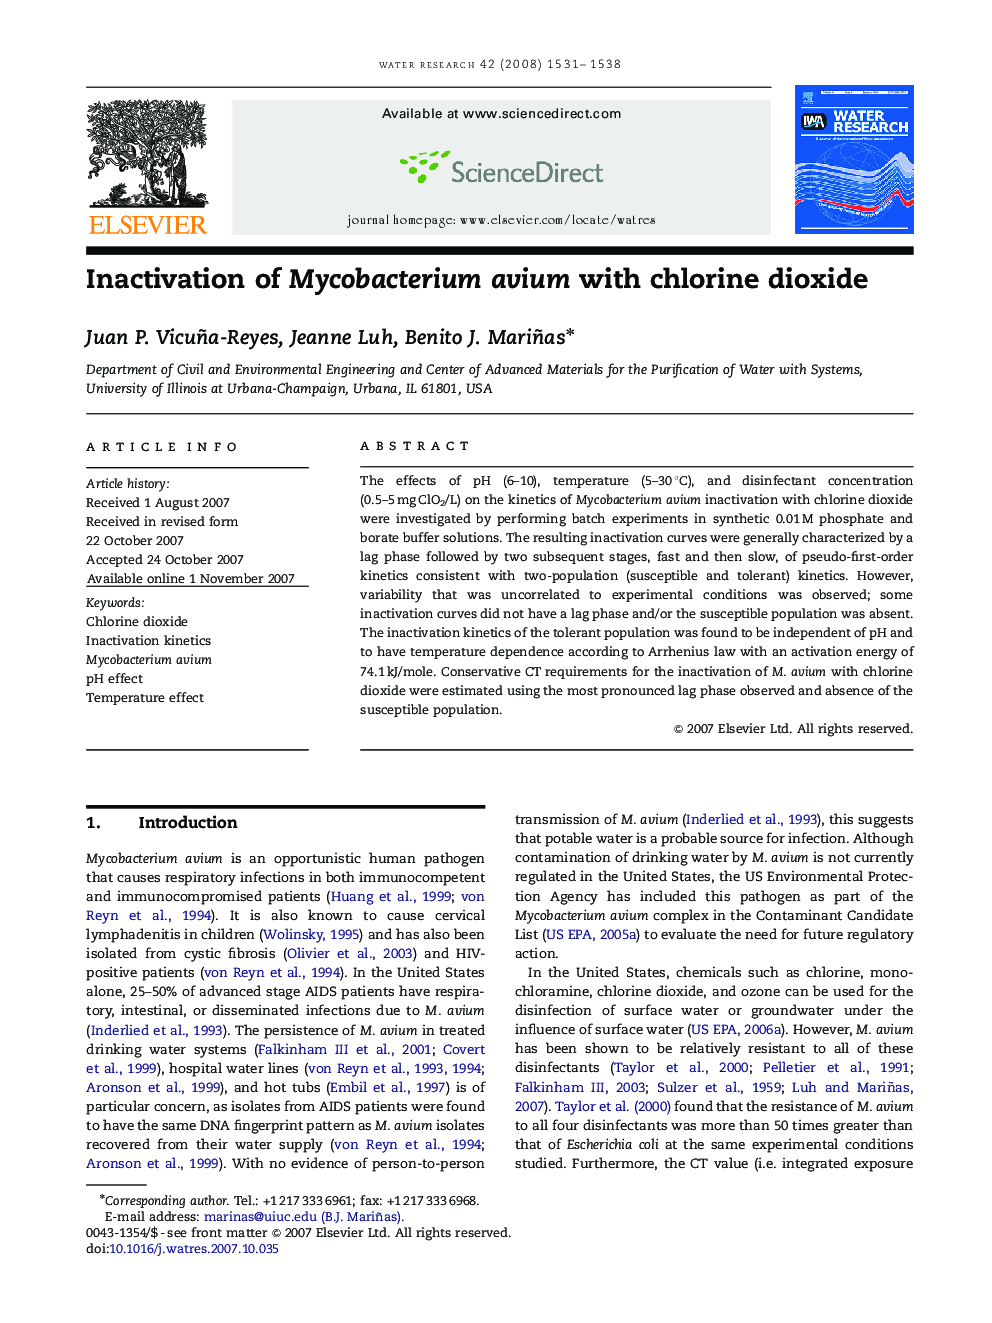 Inactivation of Mycobacterium avium with chlorine dioxide